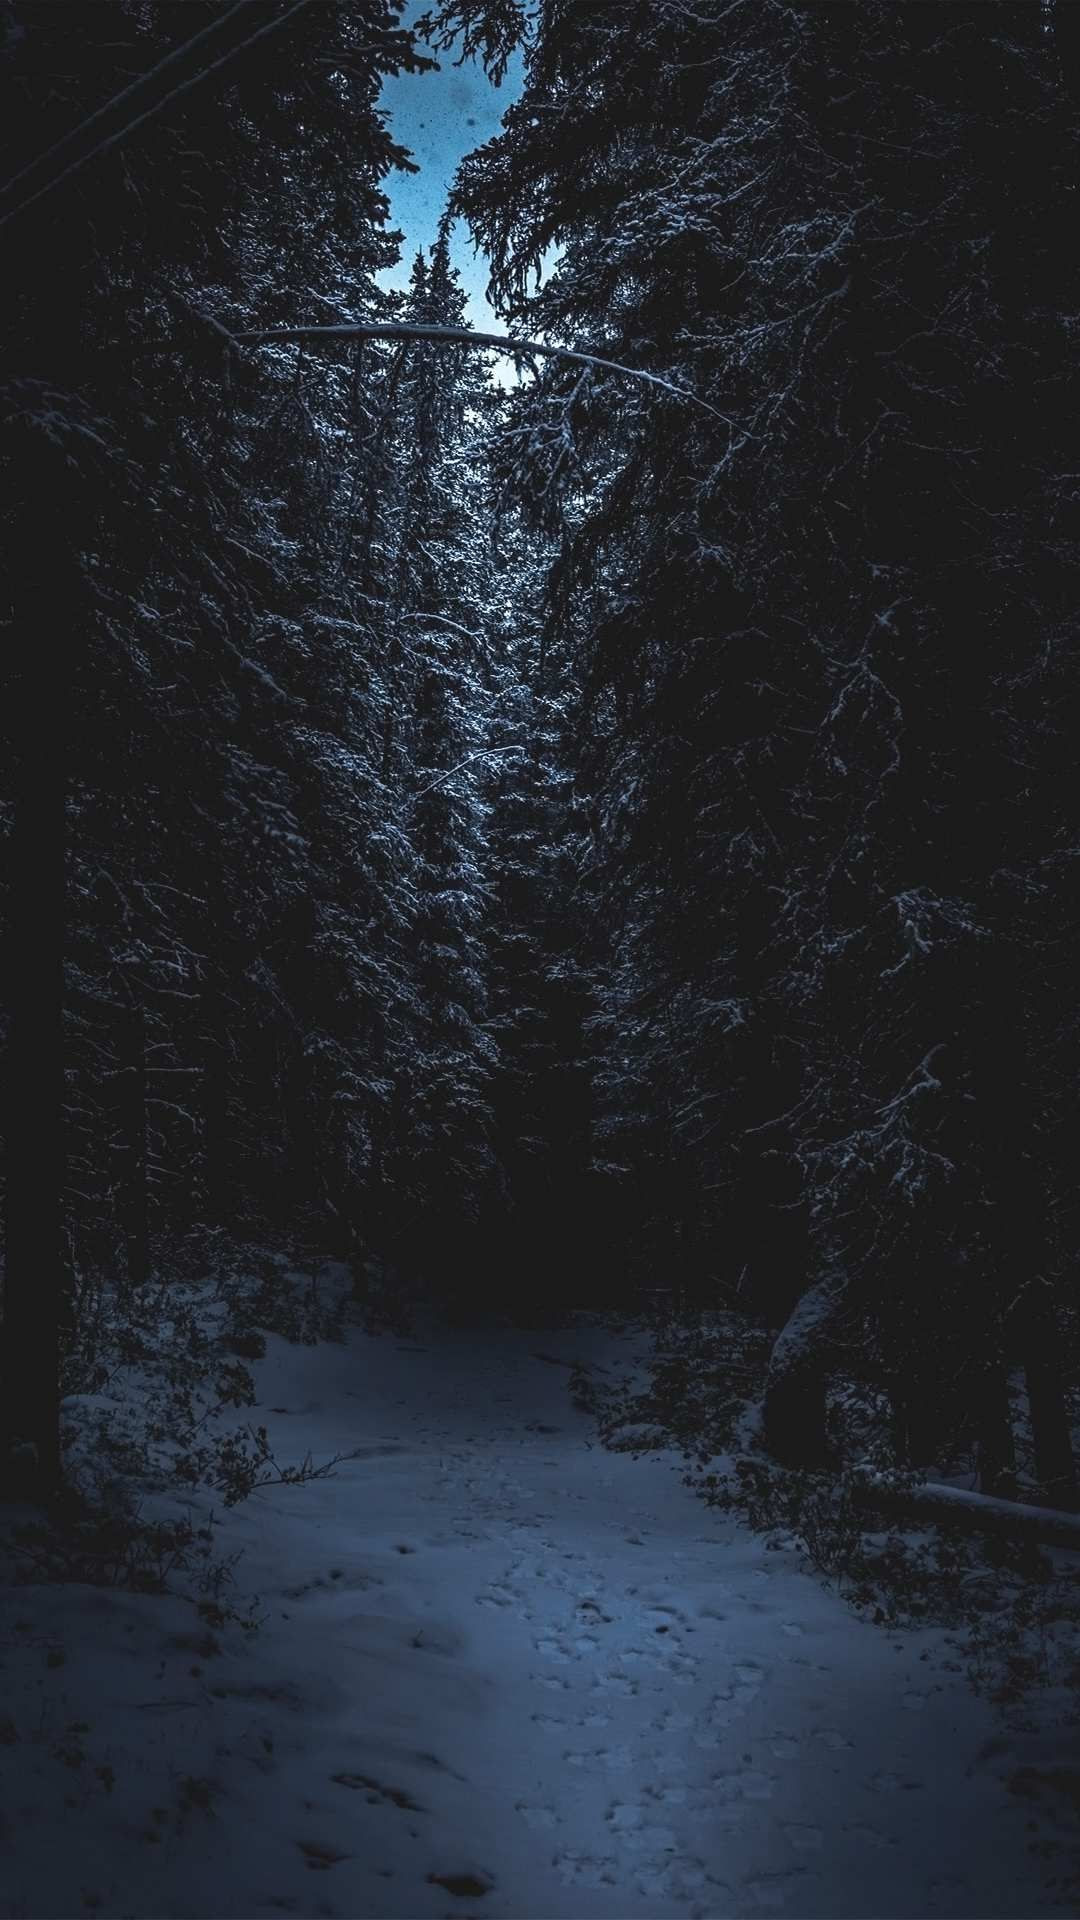 Dark Forest Wallpaper Iphone Free dark wood wallpapers wide for your sxga 16:10 720p standard smartwatch hd other desktop dual 5:4 mobile widescreen 4:3 samsung 900p 5:3 vga iphone 1080p mobile hvga hd 3:2 dvga ipod psp android definition wga 16:9 high s8 smartphone mac wvga wide fullscreen ipad. dark forest wallpaper iphone